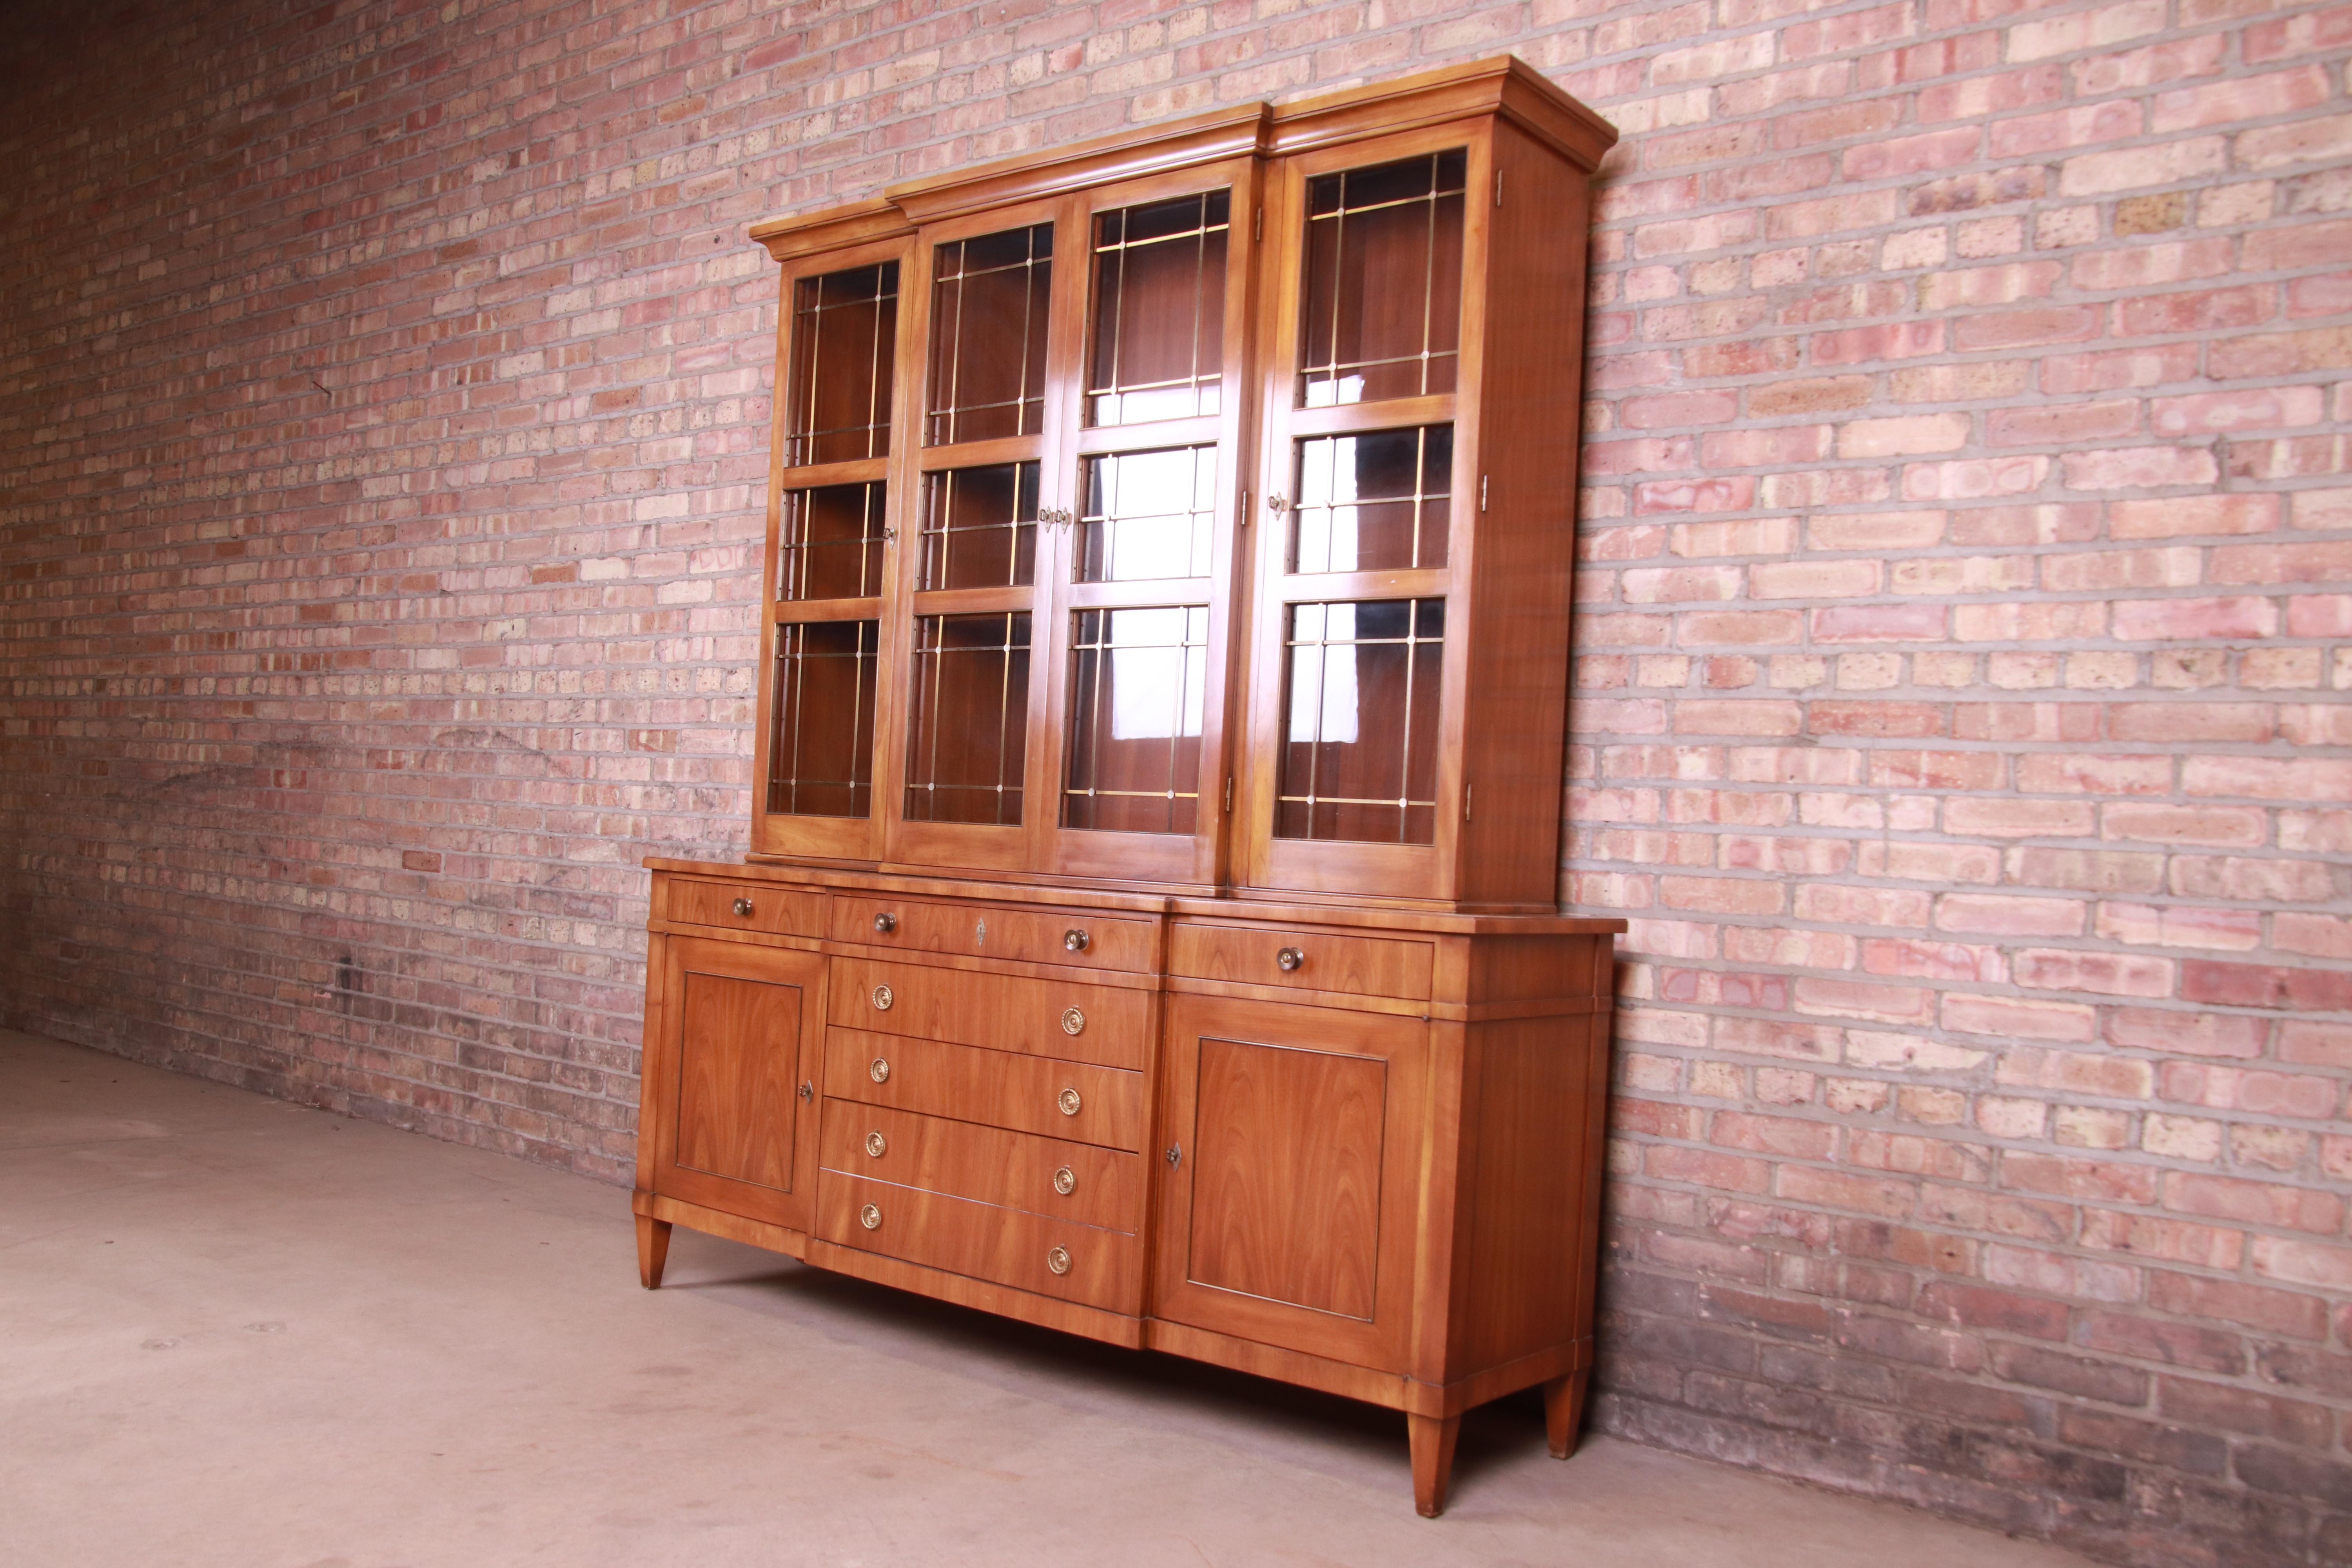 A gorgeous mid-century French Regency style sideboard credenza with glass front display cabinet or bookcase

By John Widdicomb,

USA, 1950s

Book-matched cherry wood, with mullioned glass front doors and brass hardware and